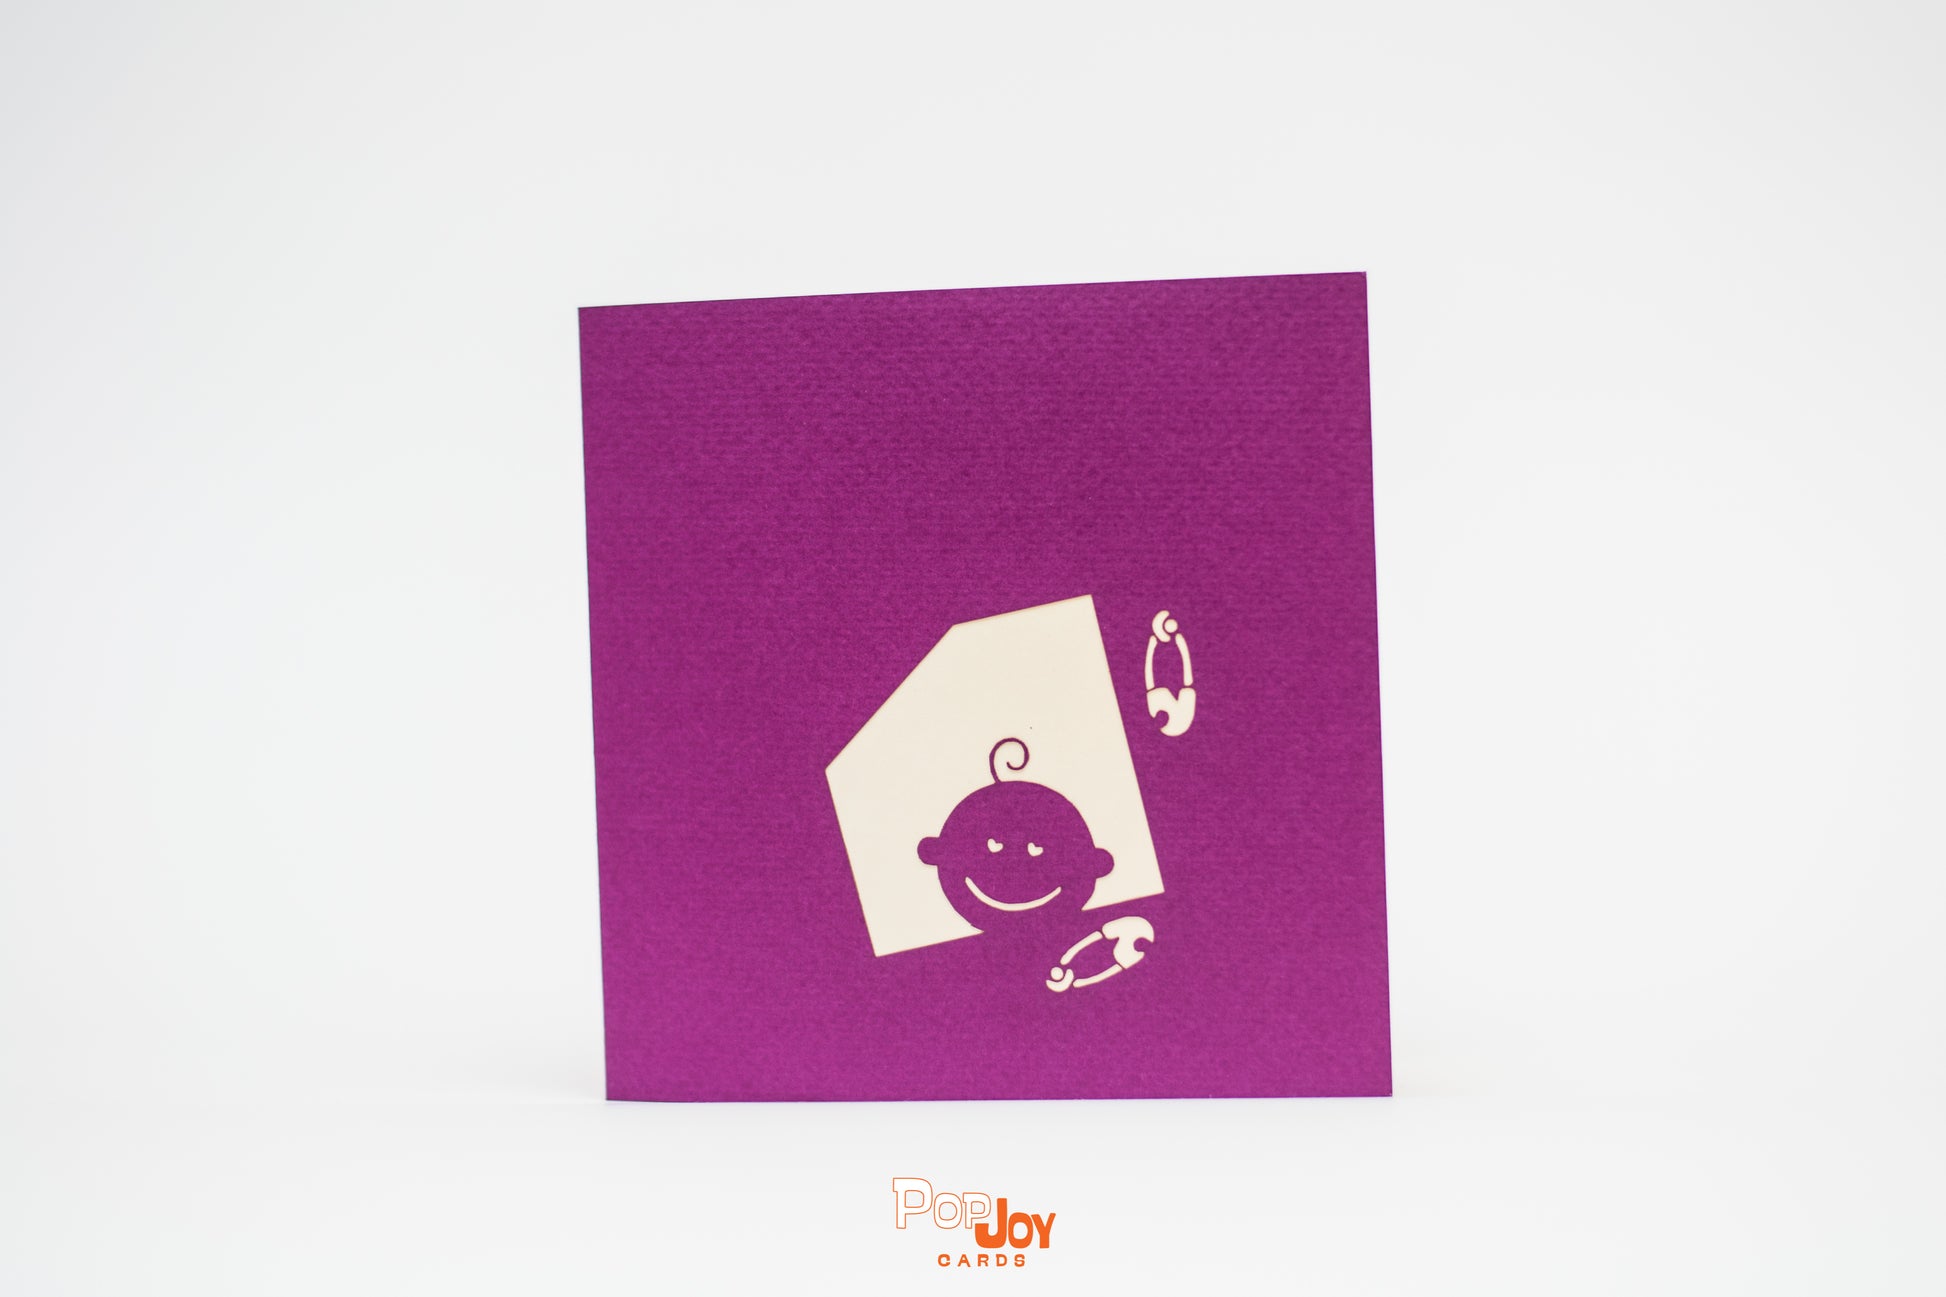 Purple card with silhouette of baby peeking out of window and two diaper pins on front cover